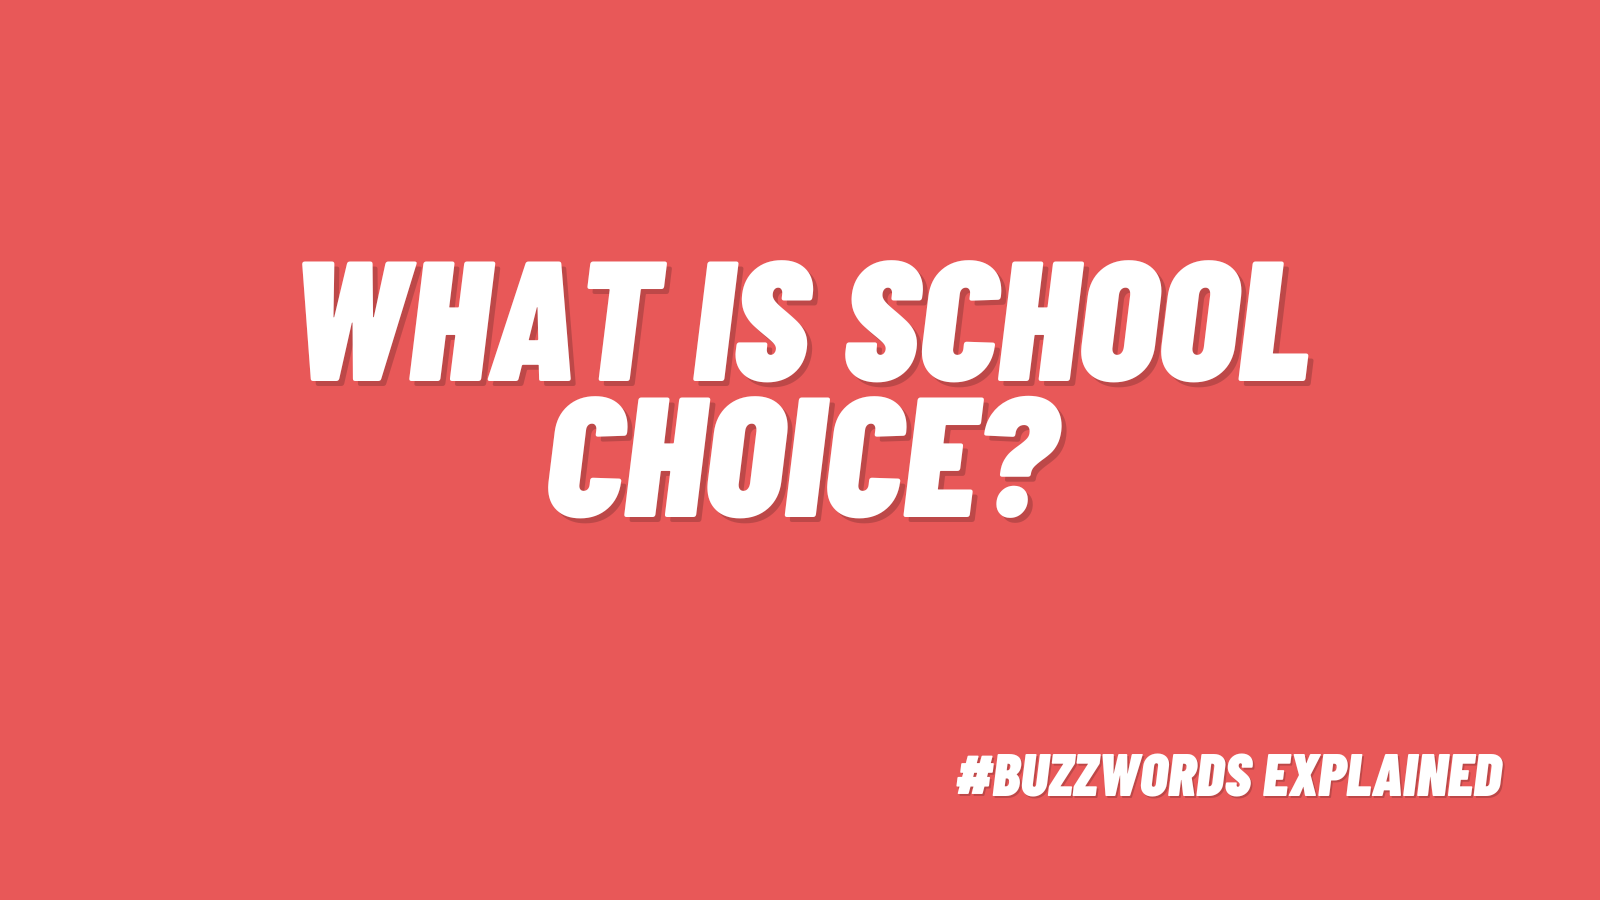 What is school choice